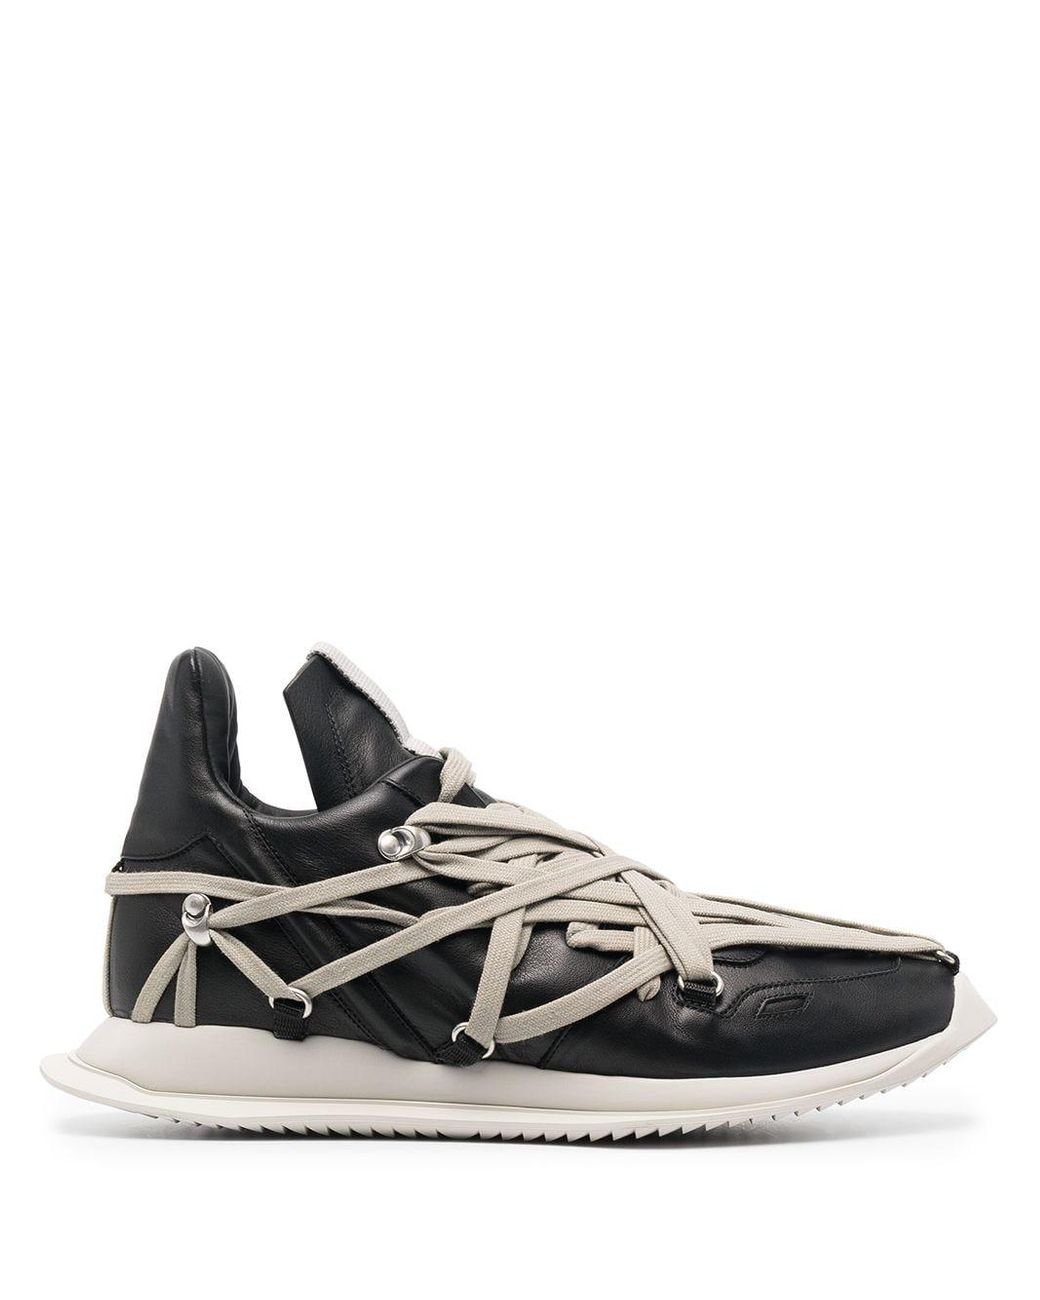 Rick Owens Layered-lace Detail Trainers in Black for Men - Lyst